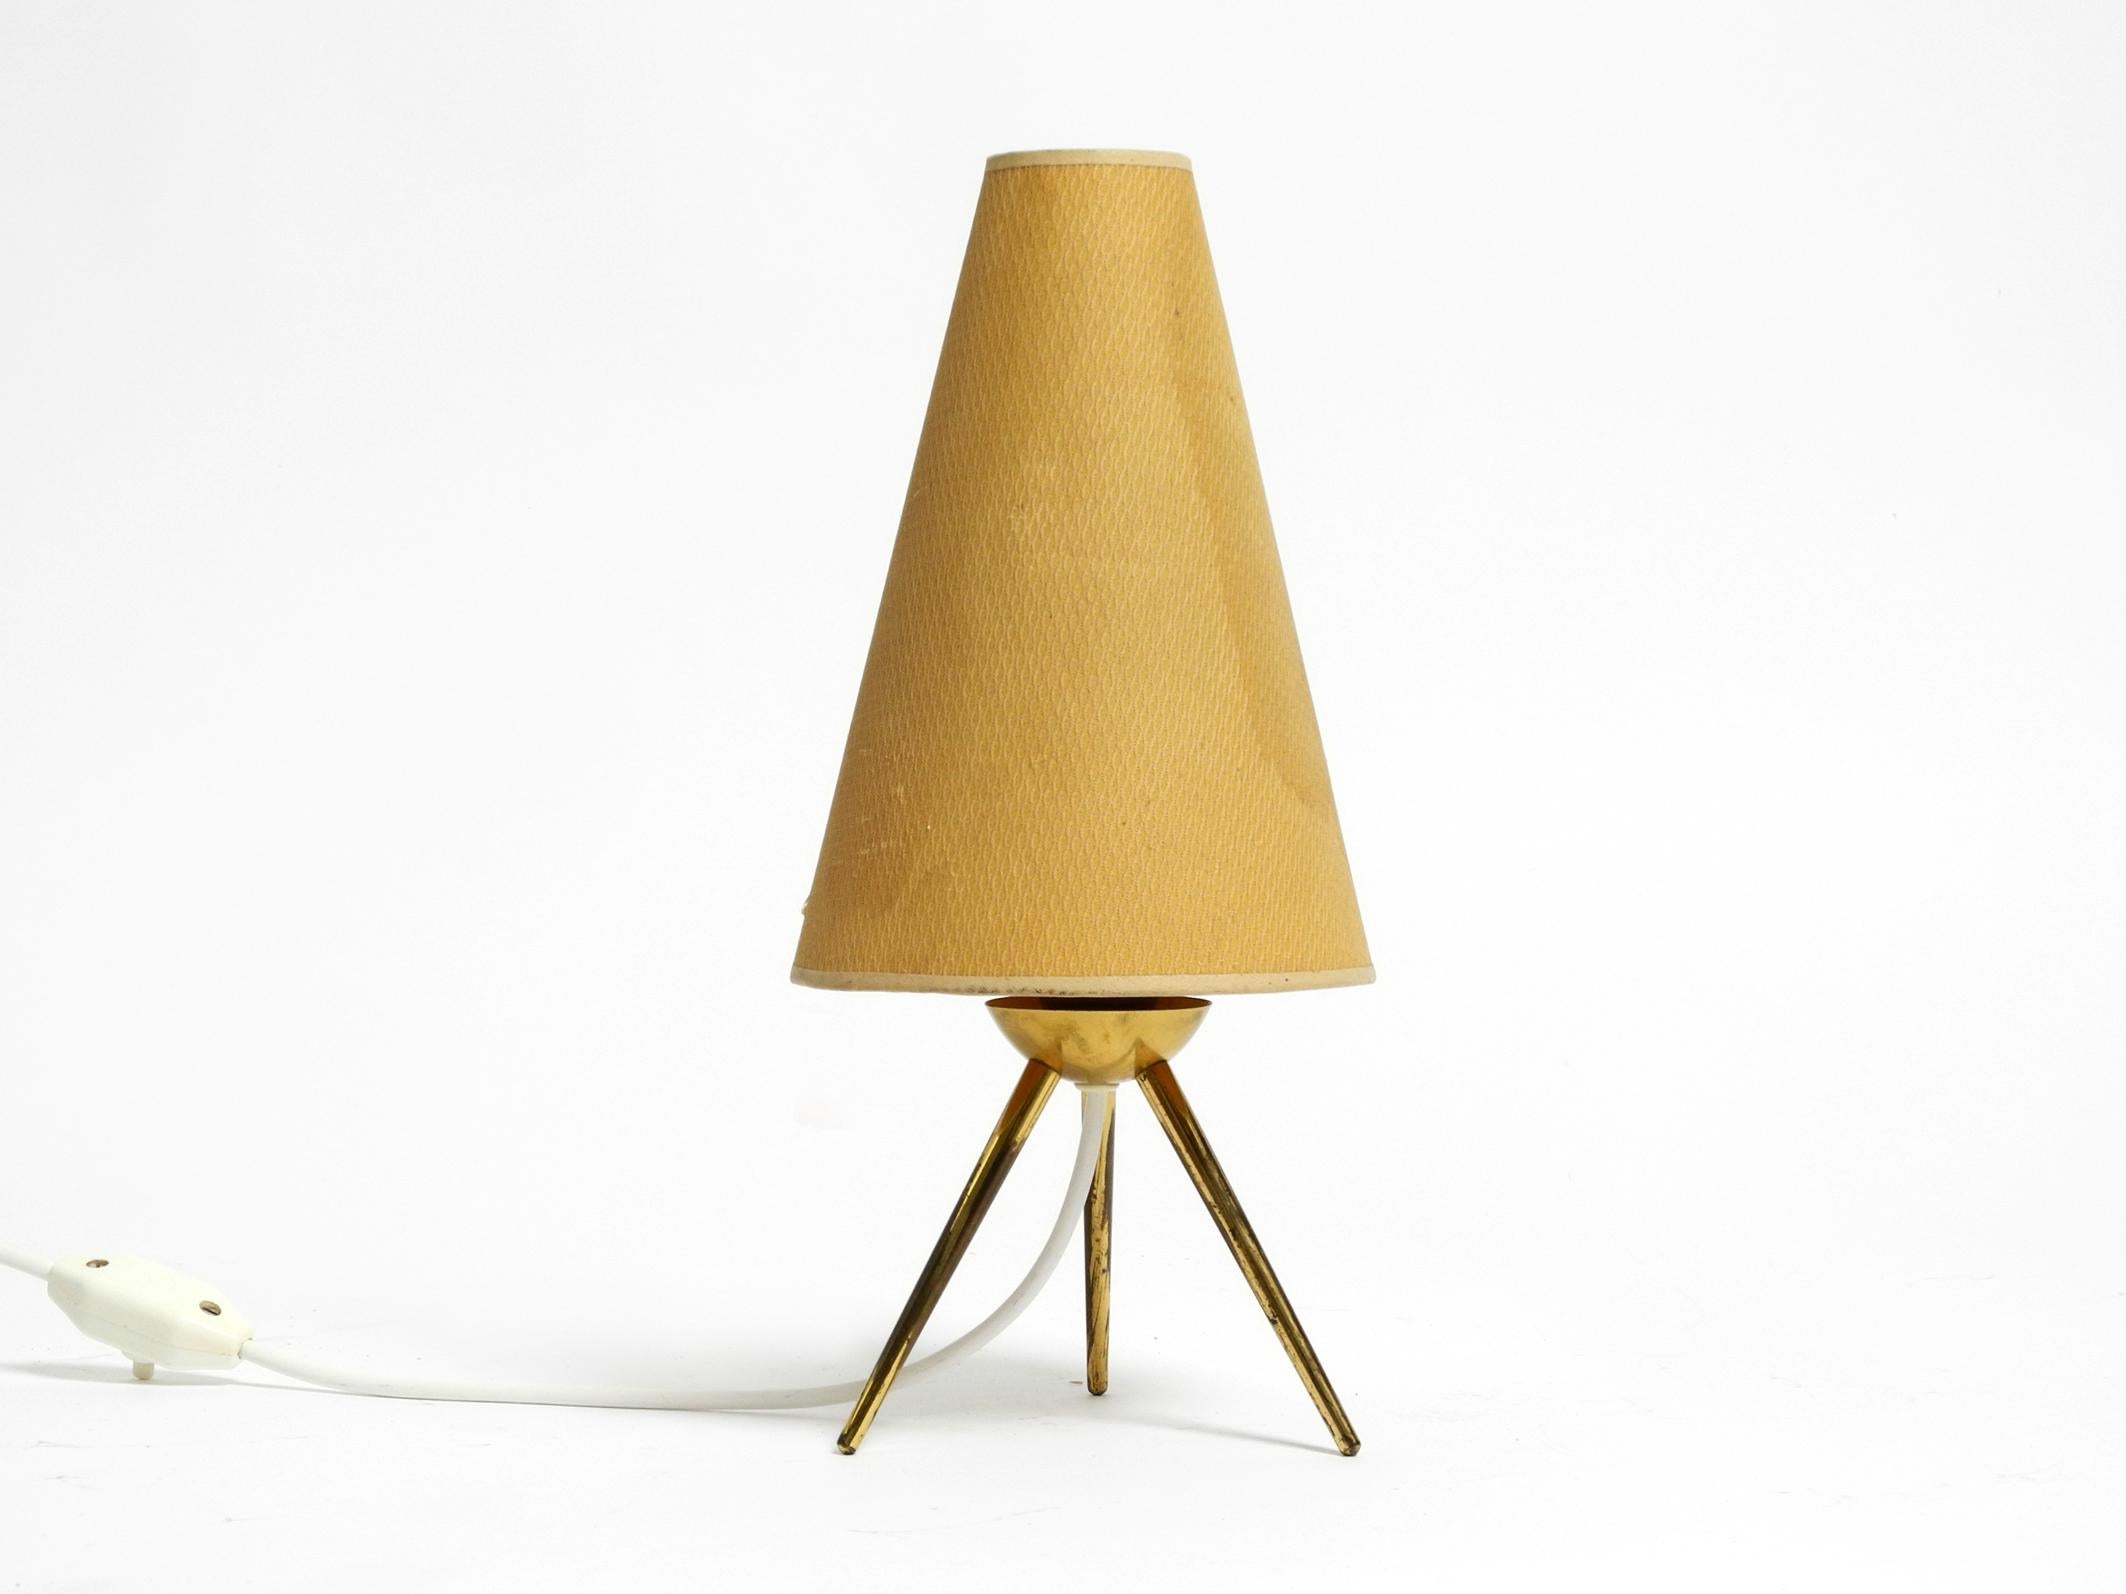 Very elegant original Mid Century Modern brass tripod table lamp with original lampshade.
Beautiful typical 1950s design made entirely of brass.
Very good vintage condition and fully functional.
Slight signs of wear on the lamp.
No damage to the